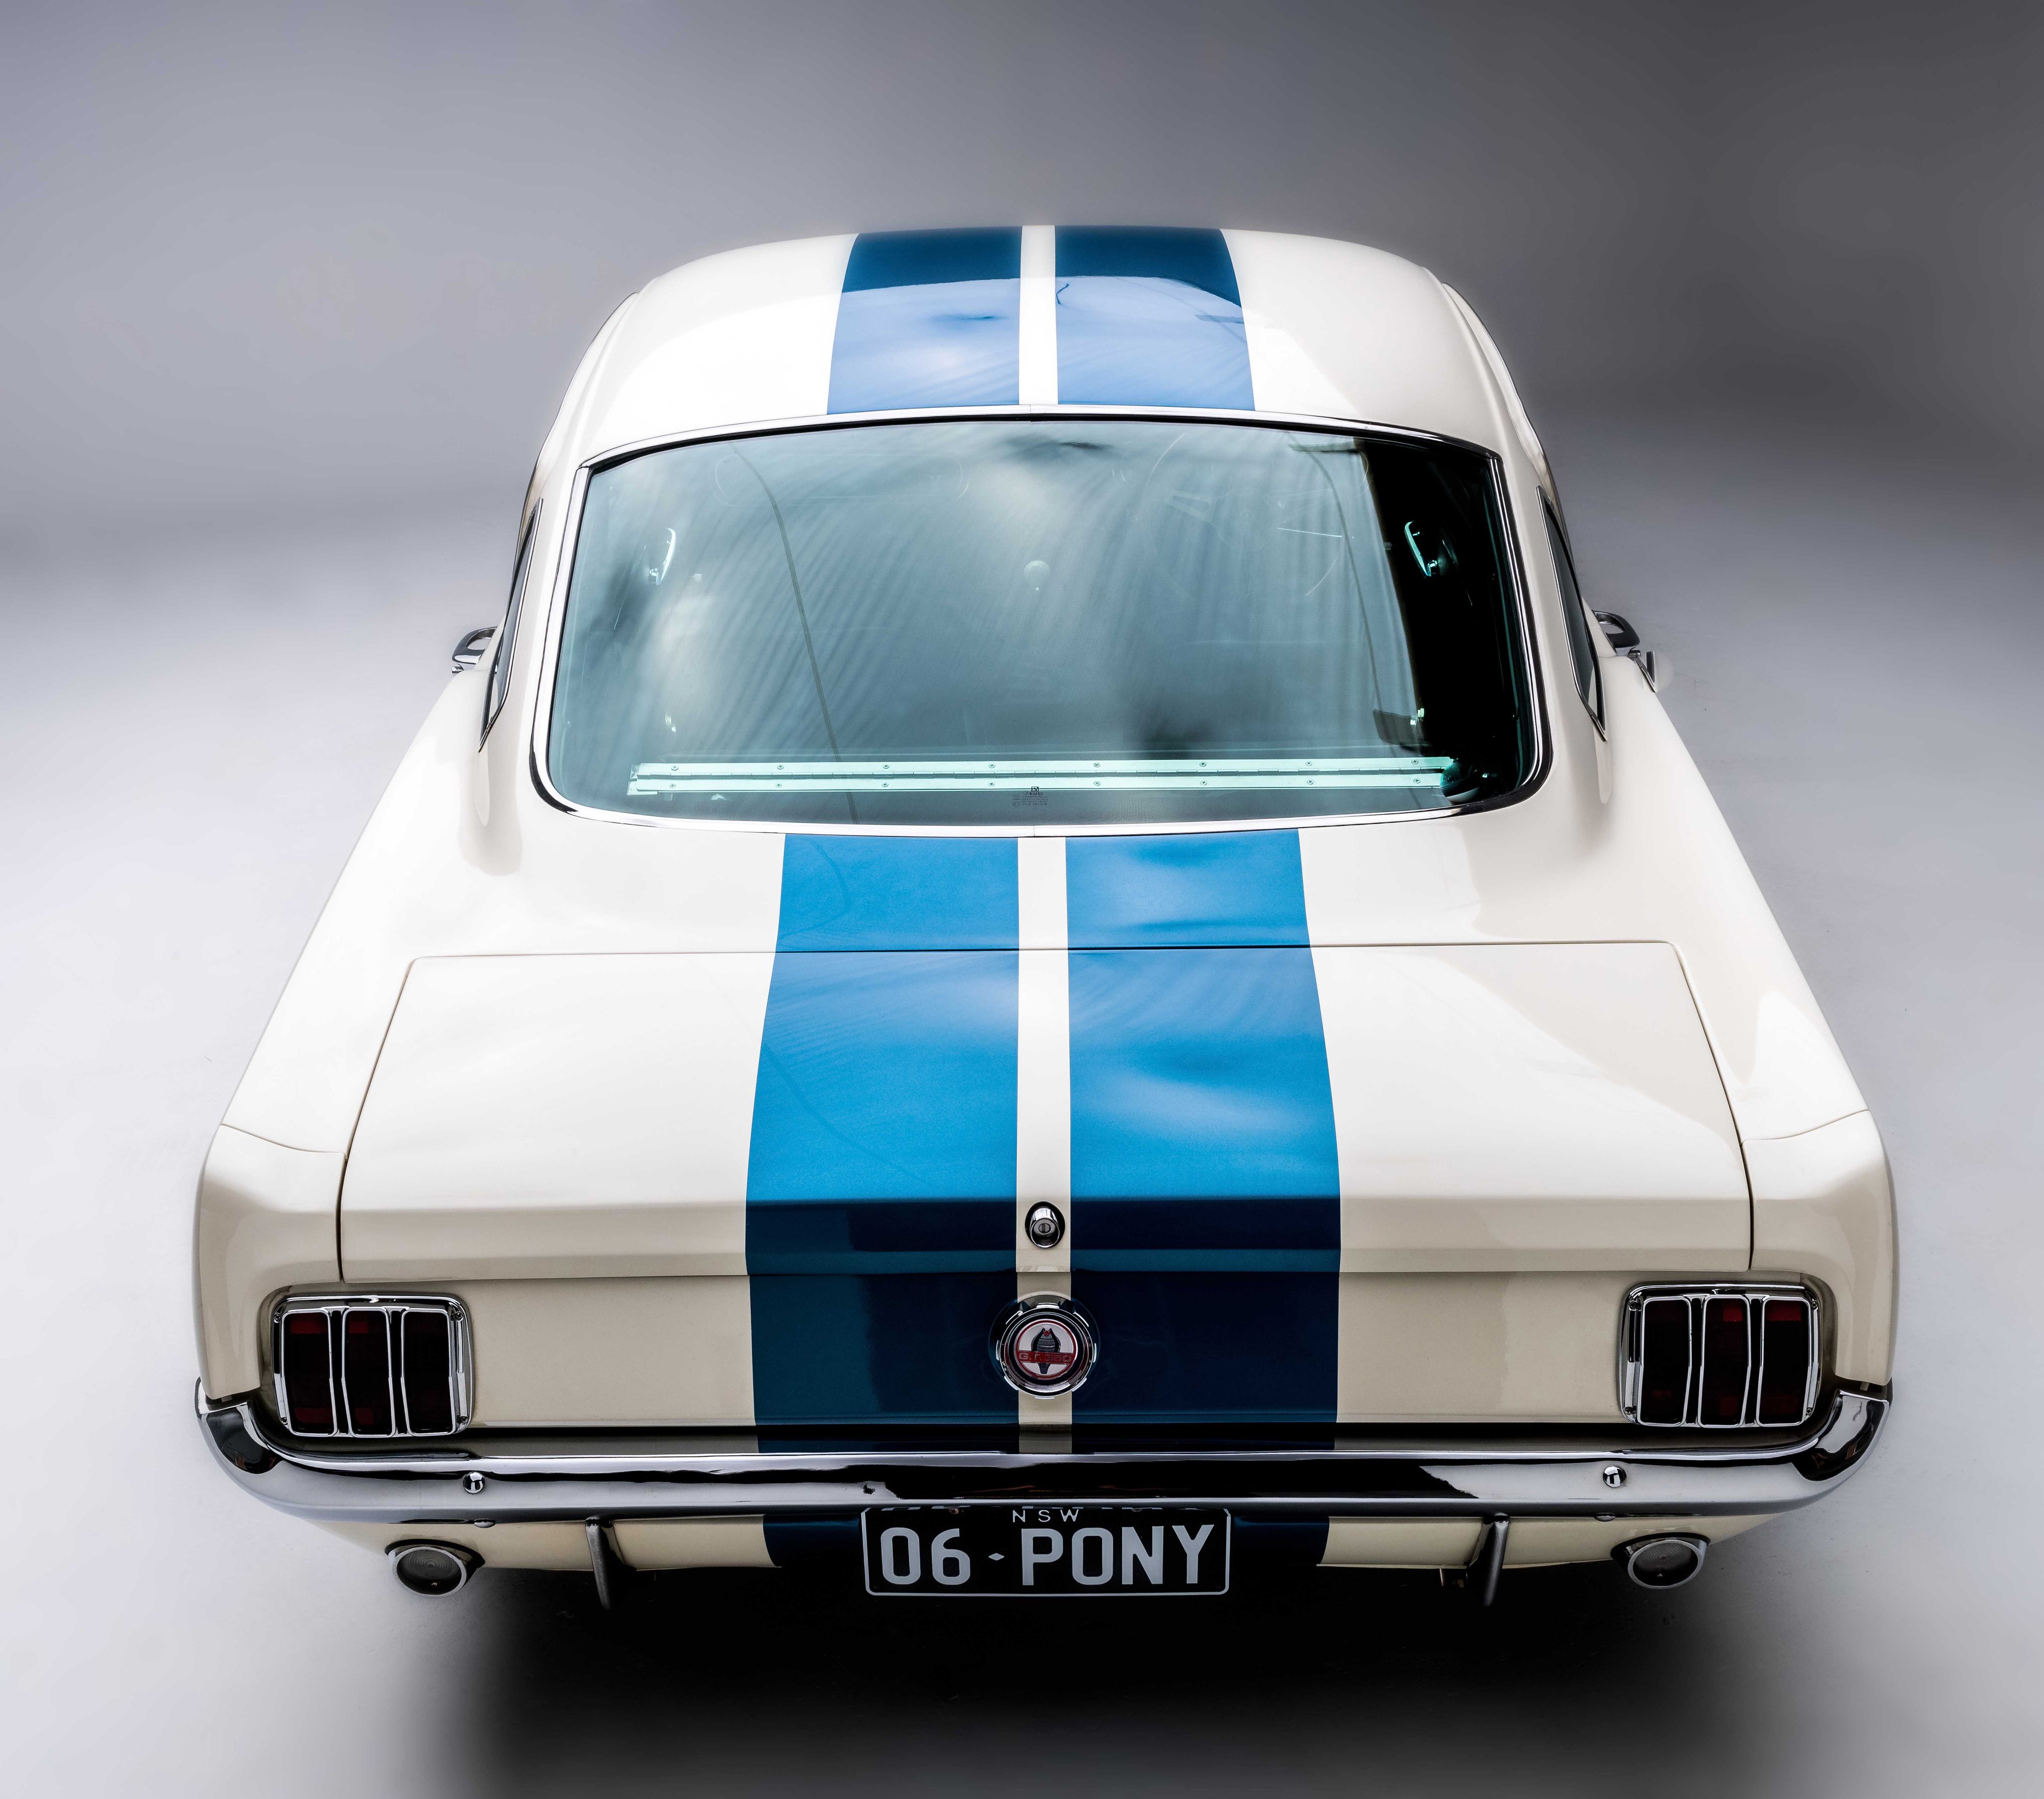 1966, Shelby, Gt350, Au spec, Muscle, Classic, Ford, Mustang Wallpaper